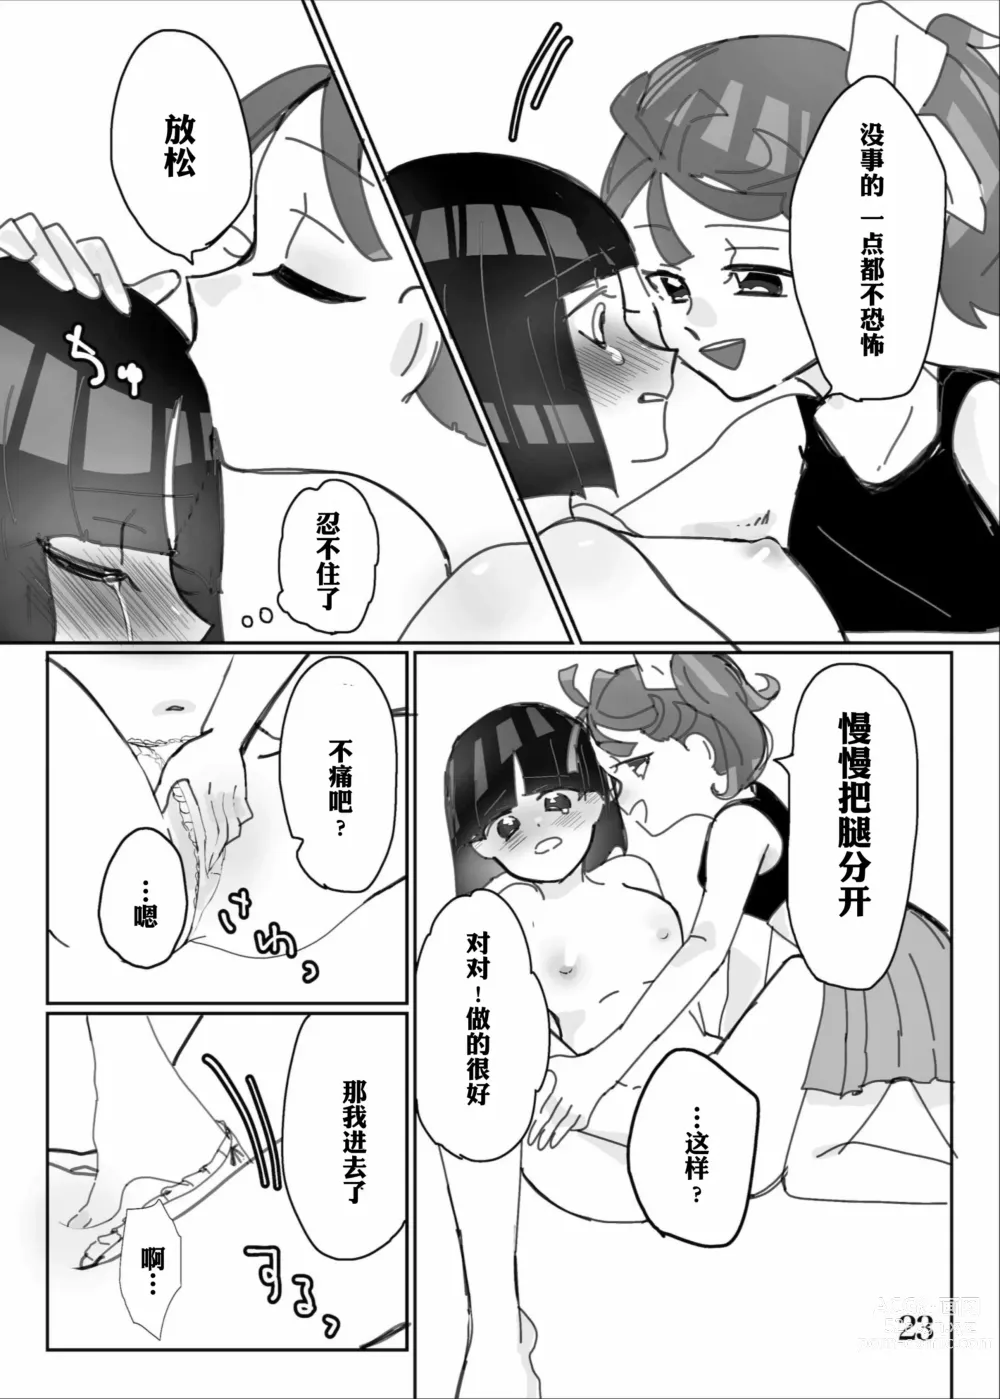 Page 25 of doujinshi 想做能干的孩子♪ DO MY BEST!